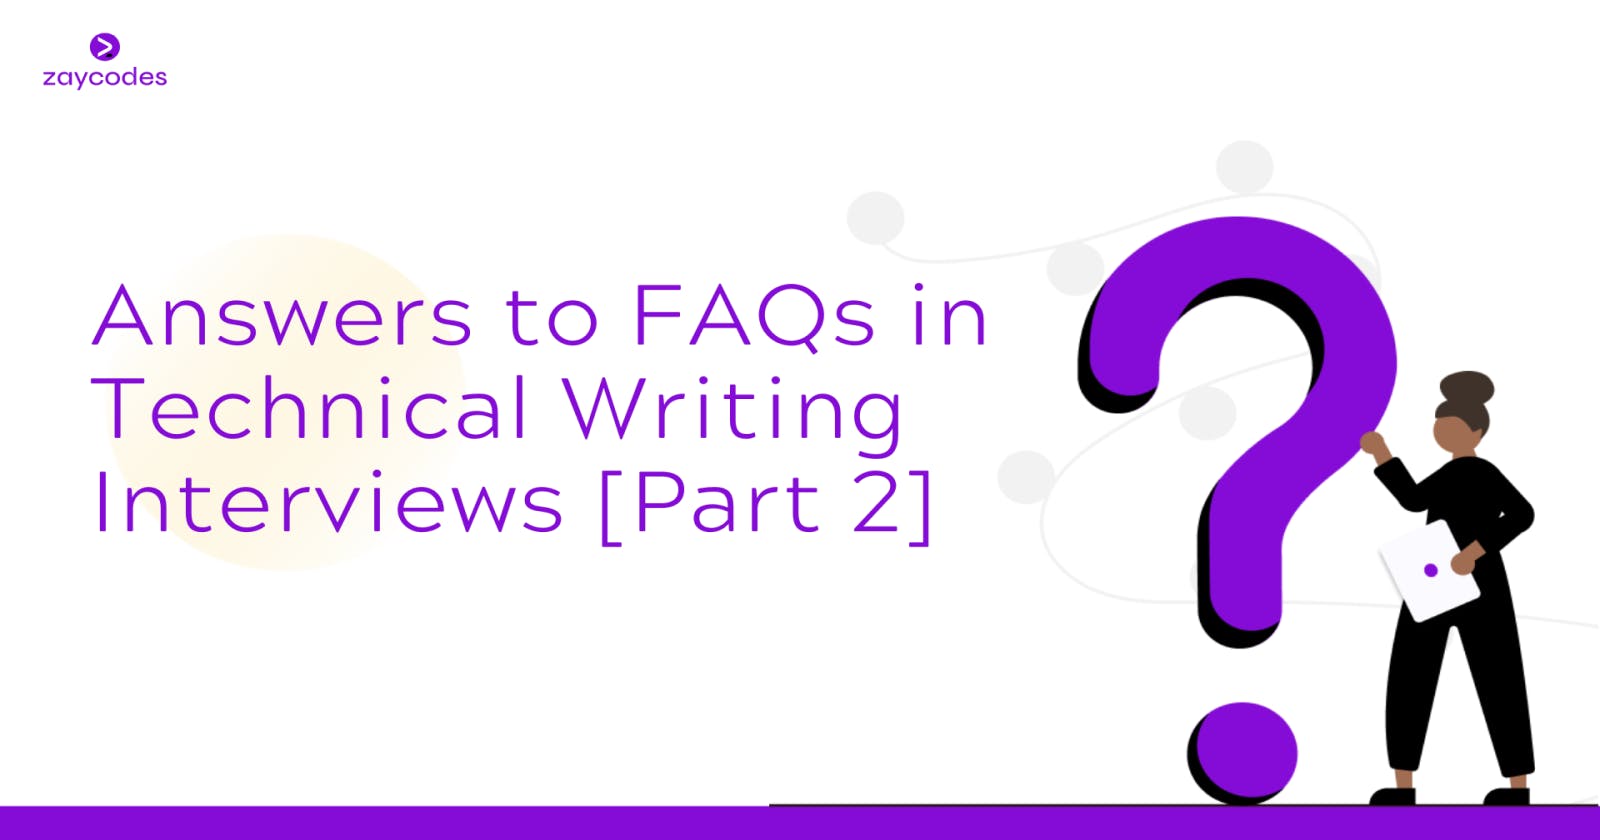 Answers to Frequently Asked Questions in Technical Writing Interviews [Part 2]